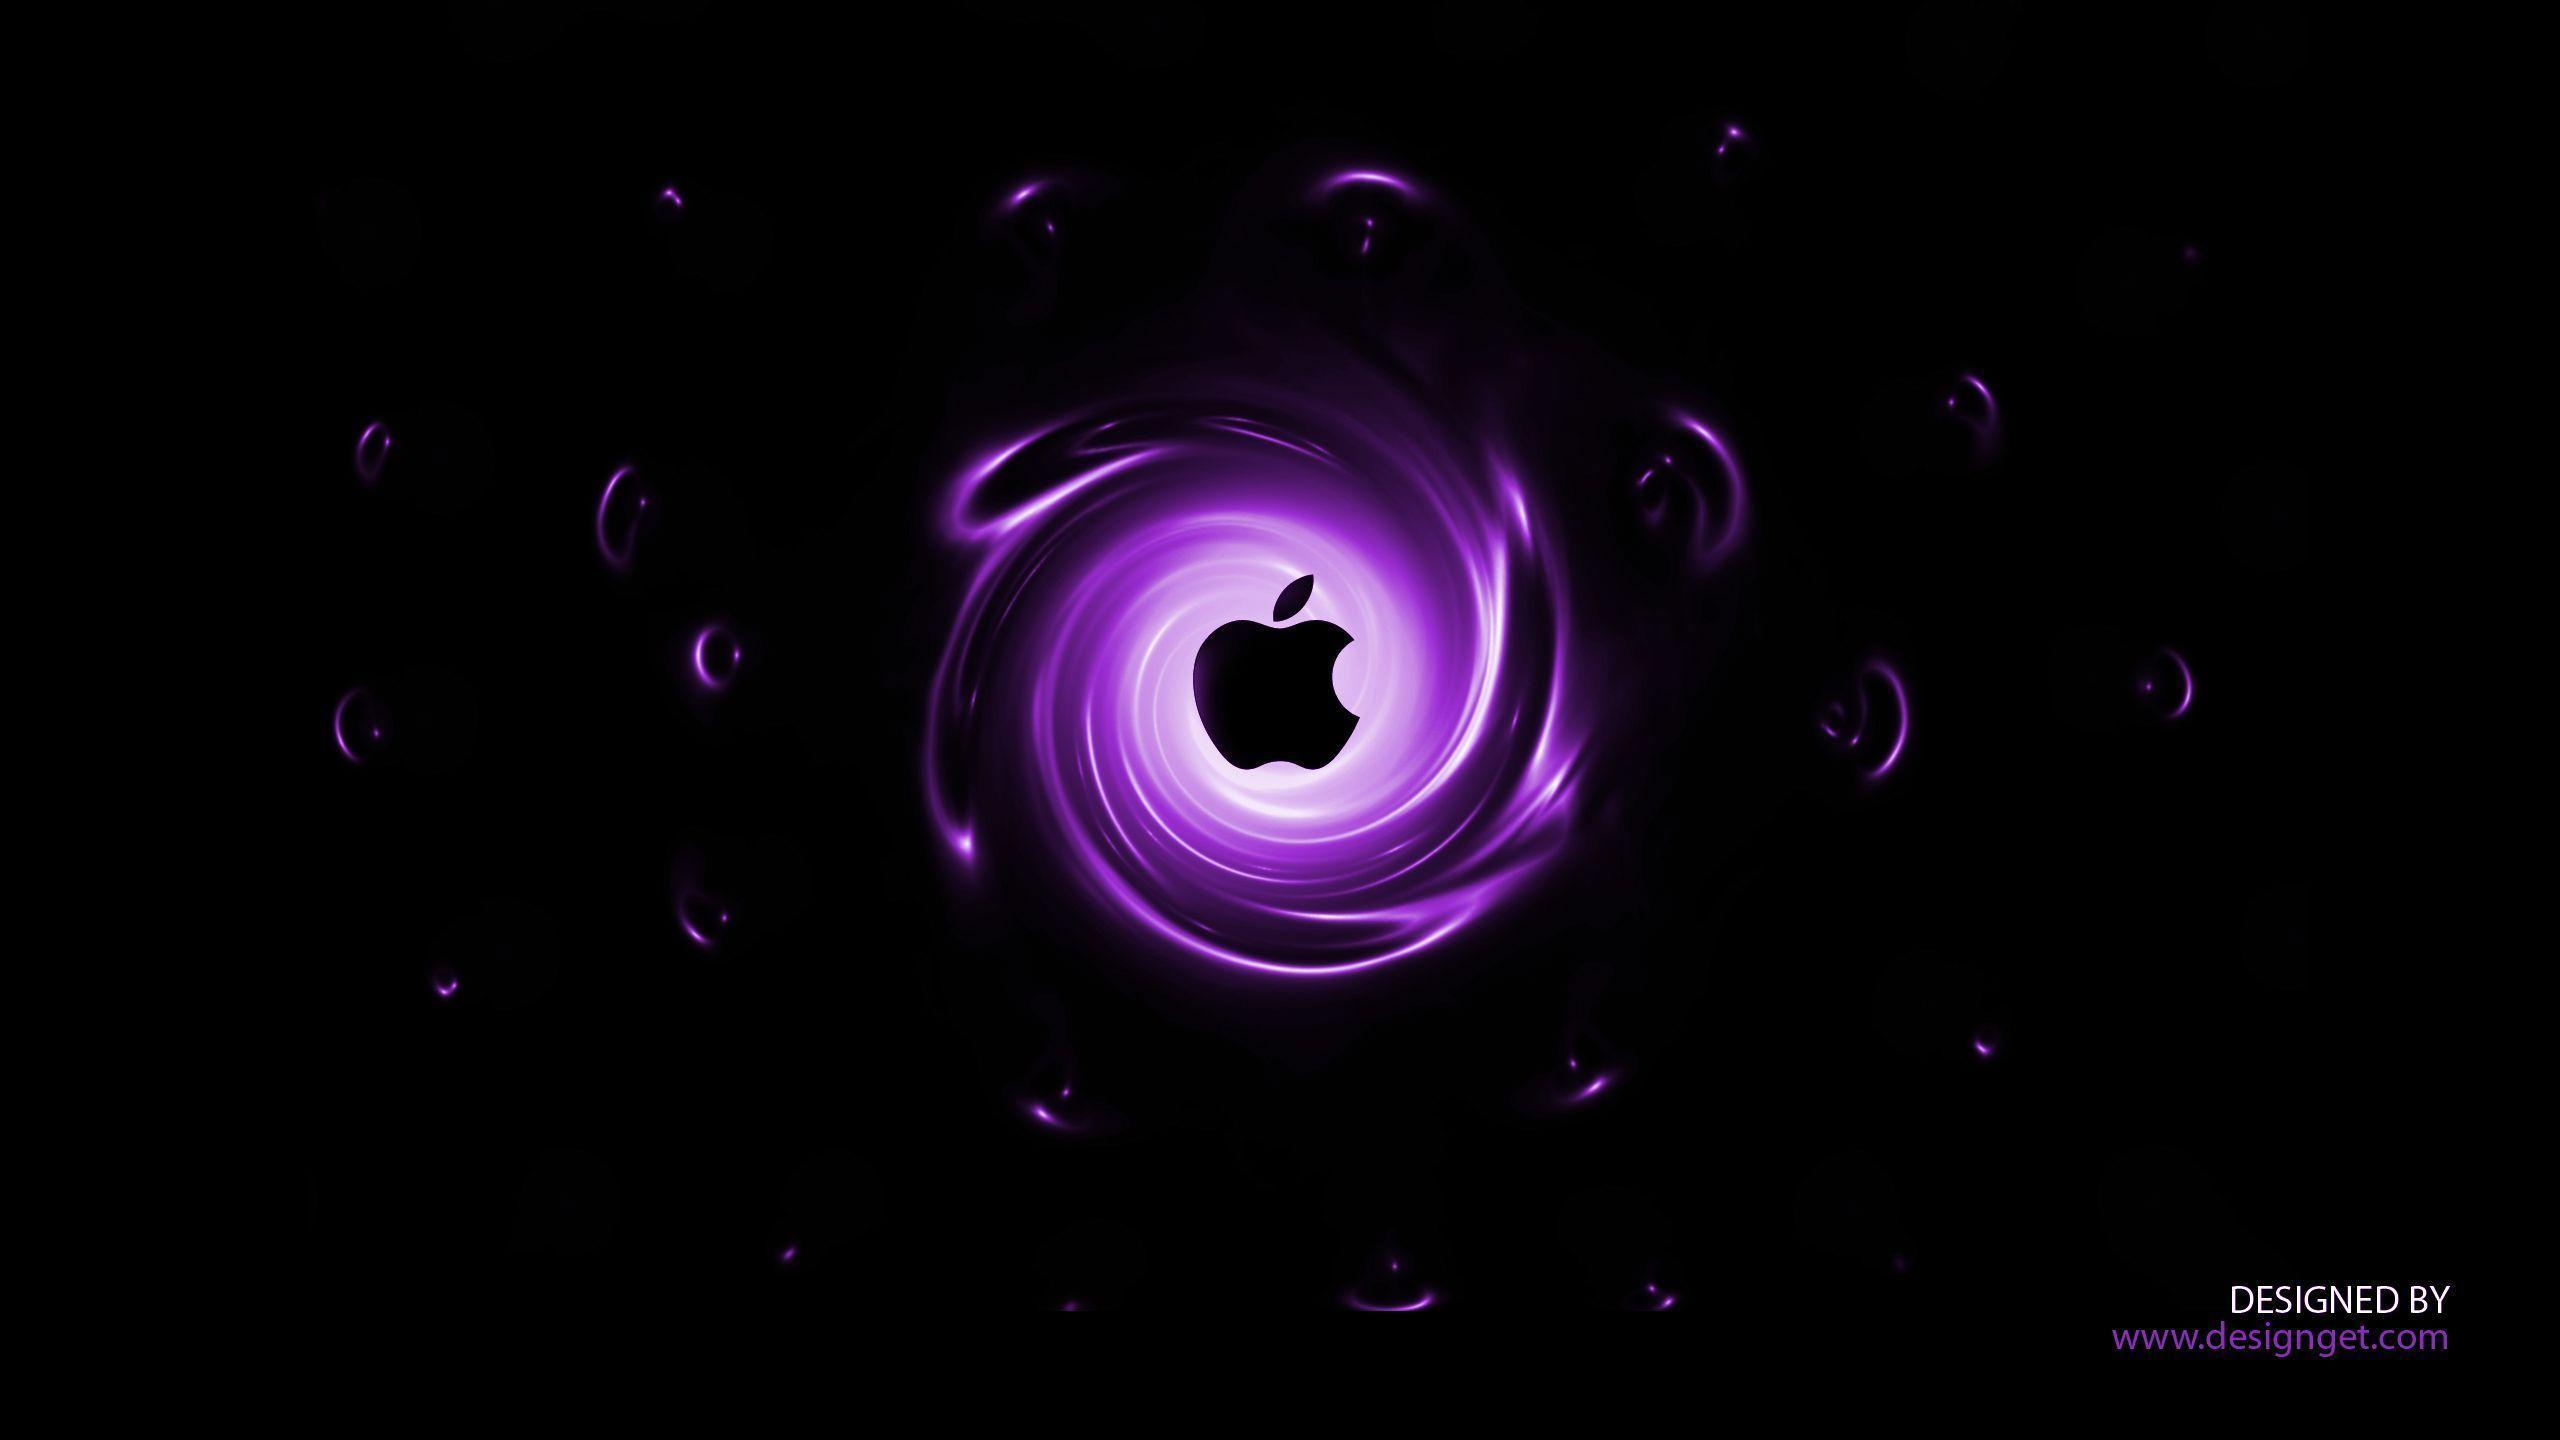 Imac 27 Inch wallpapers